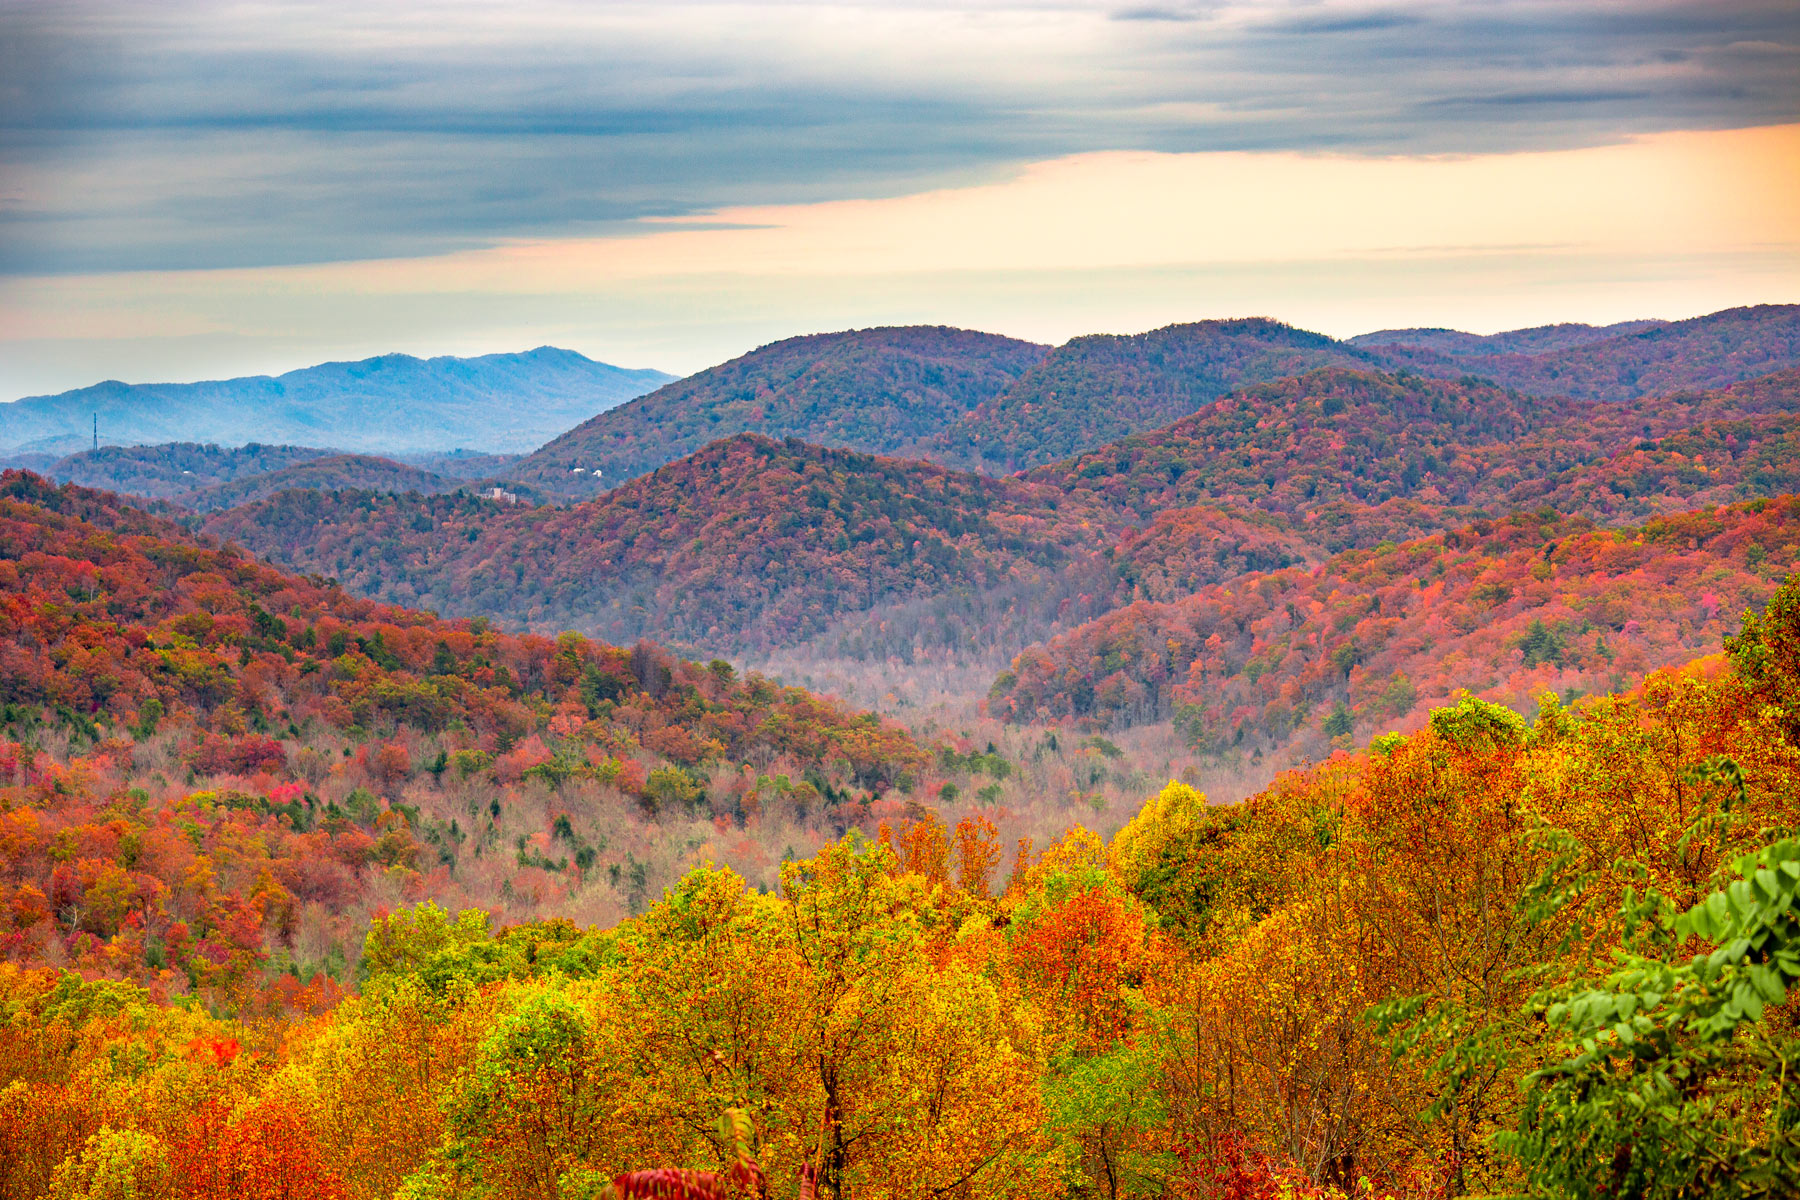 4 EPIC National Parks Near Raleigh You’ll Love (Photos + Guide)